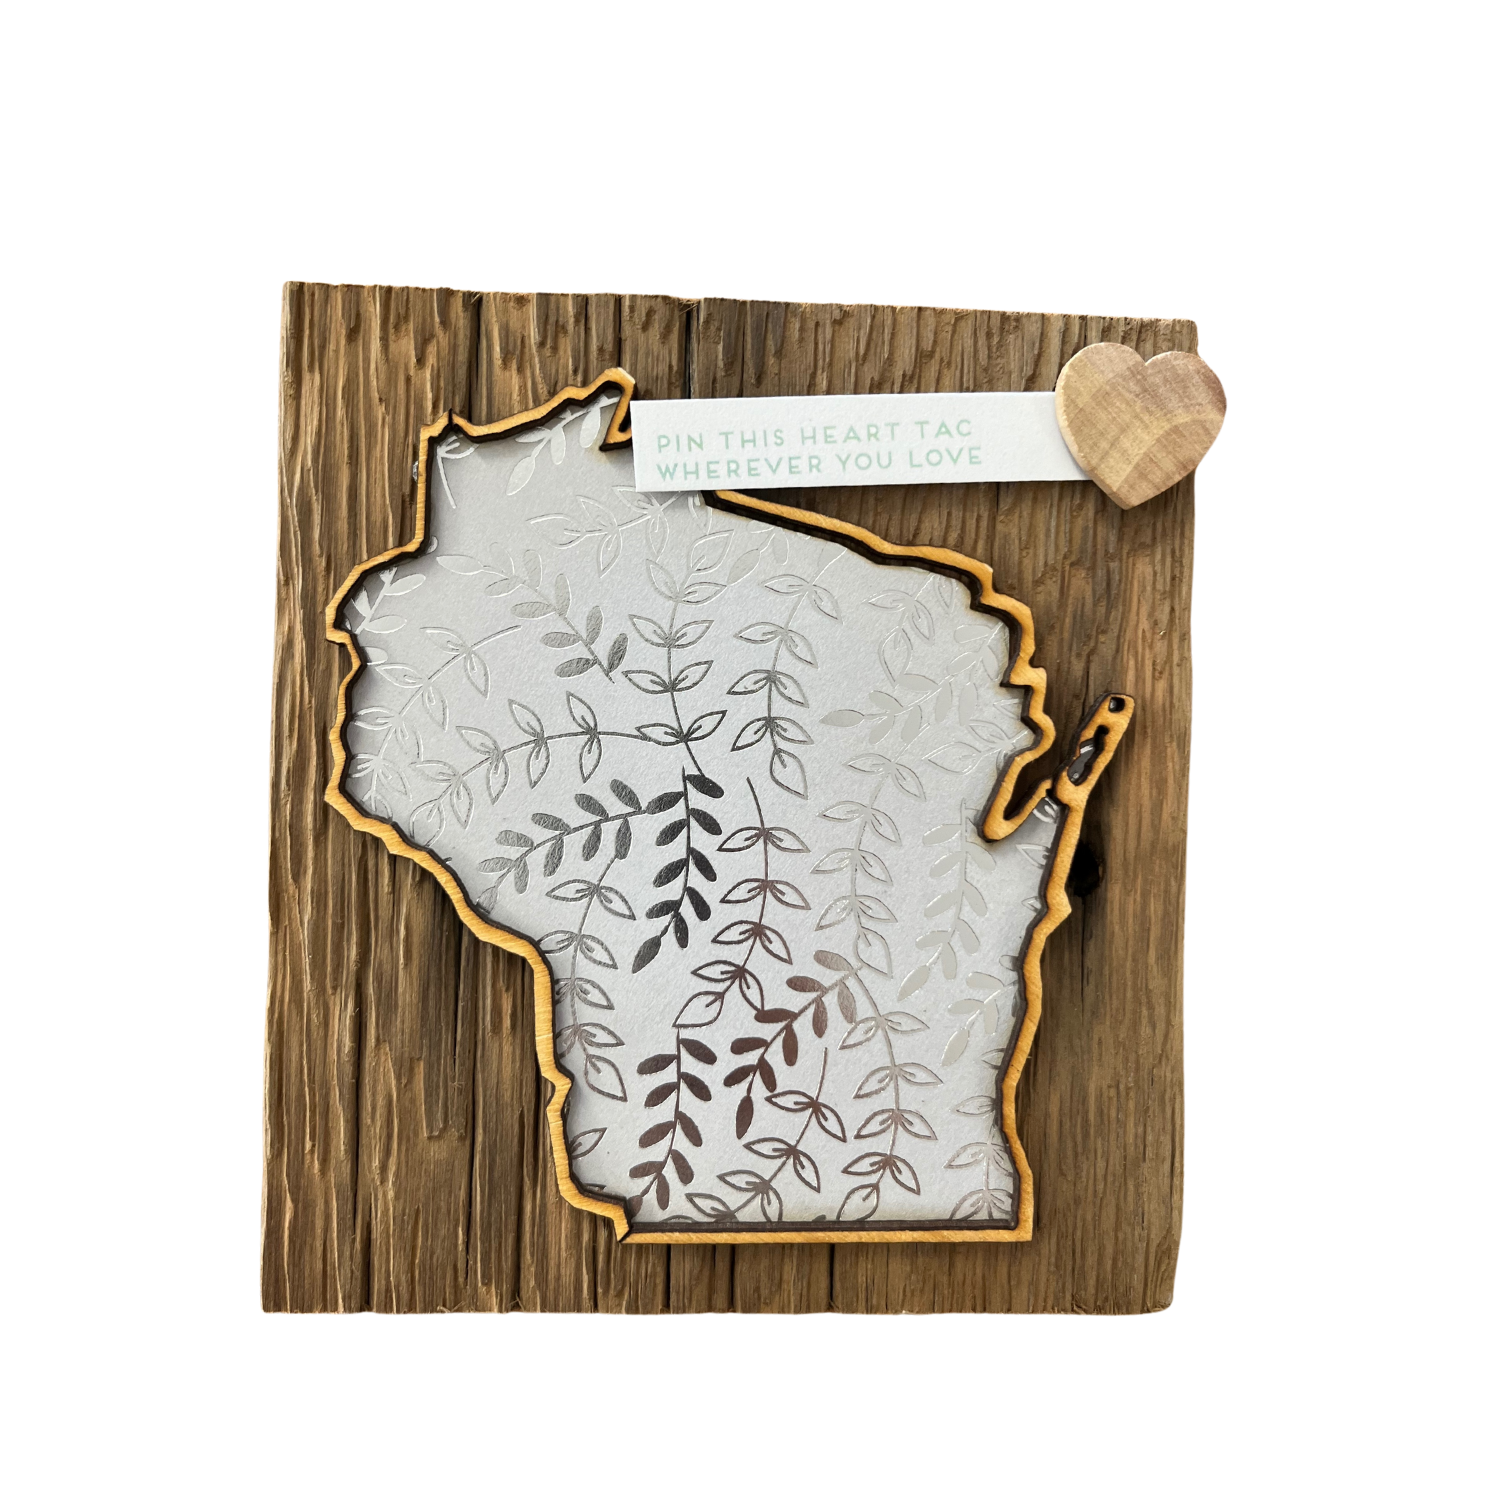 Love Where You Live Wall Art - Wisconsin